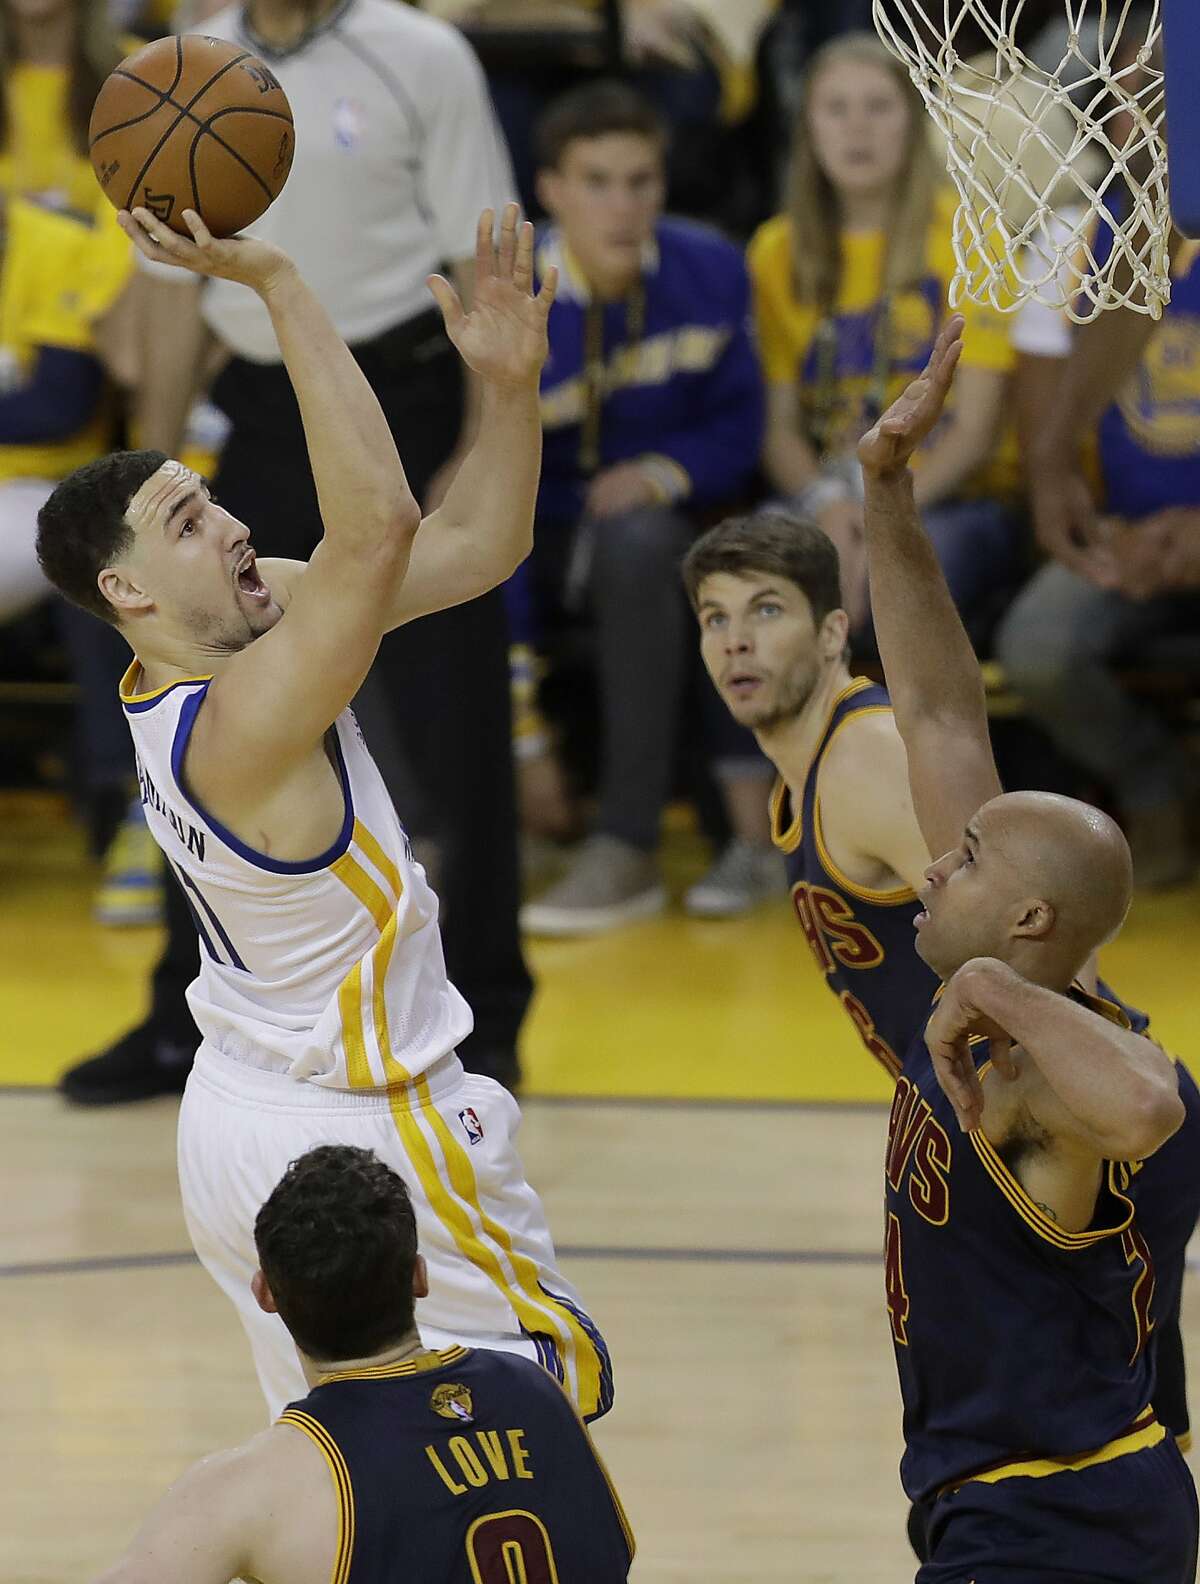 Golden State Warriors guard Klay Thompson, left, shoots against Cleveland Cavaliers forward Richard Jefferson, right, during the first half of Game 1 of basketball's NBA Finals in Oakland, Calif., Thursday, June 1, 2017. (AP Photo/Marcio Jose Sanchez)